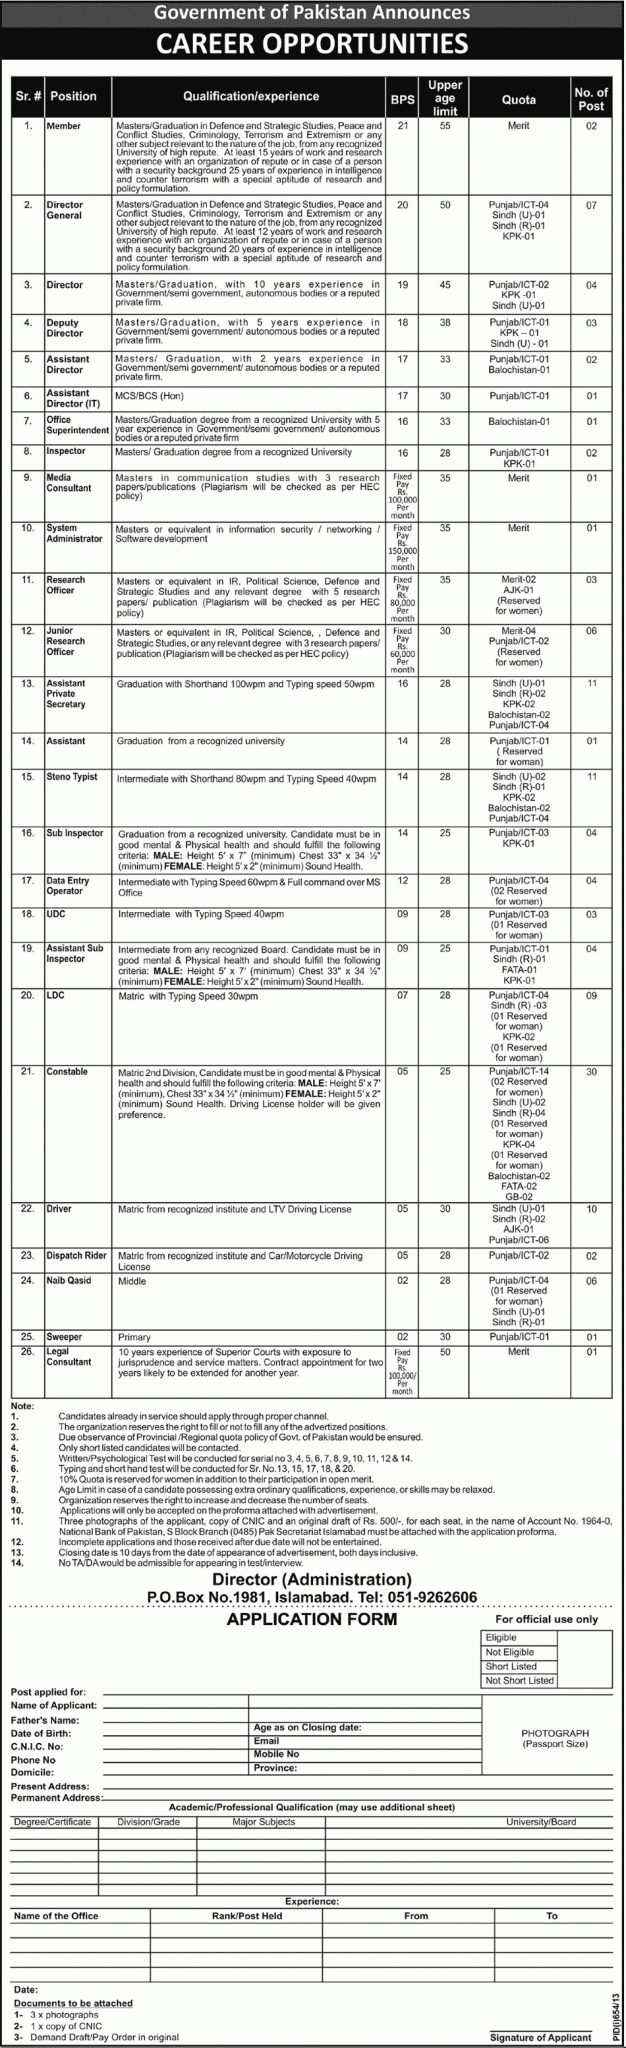 Govt. of Pakistan announce Jobs in Islamabad 16th August 2013